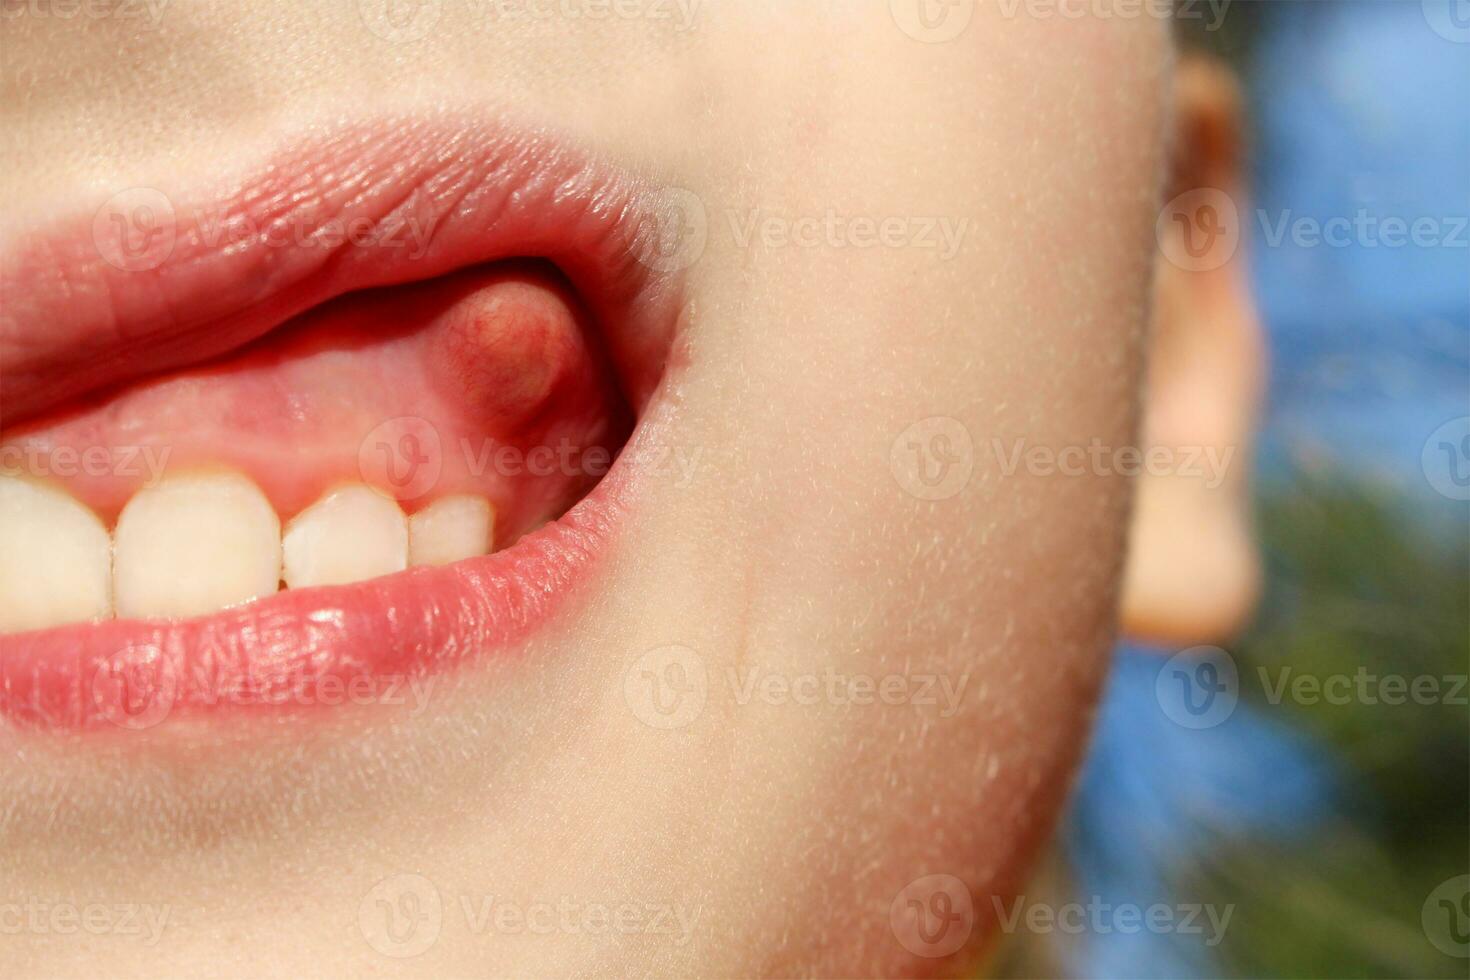 Swelling on gums the child. photo